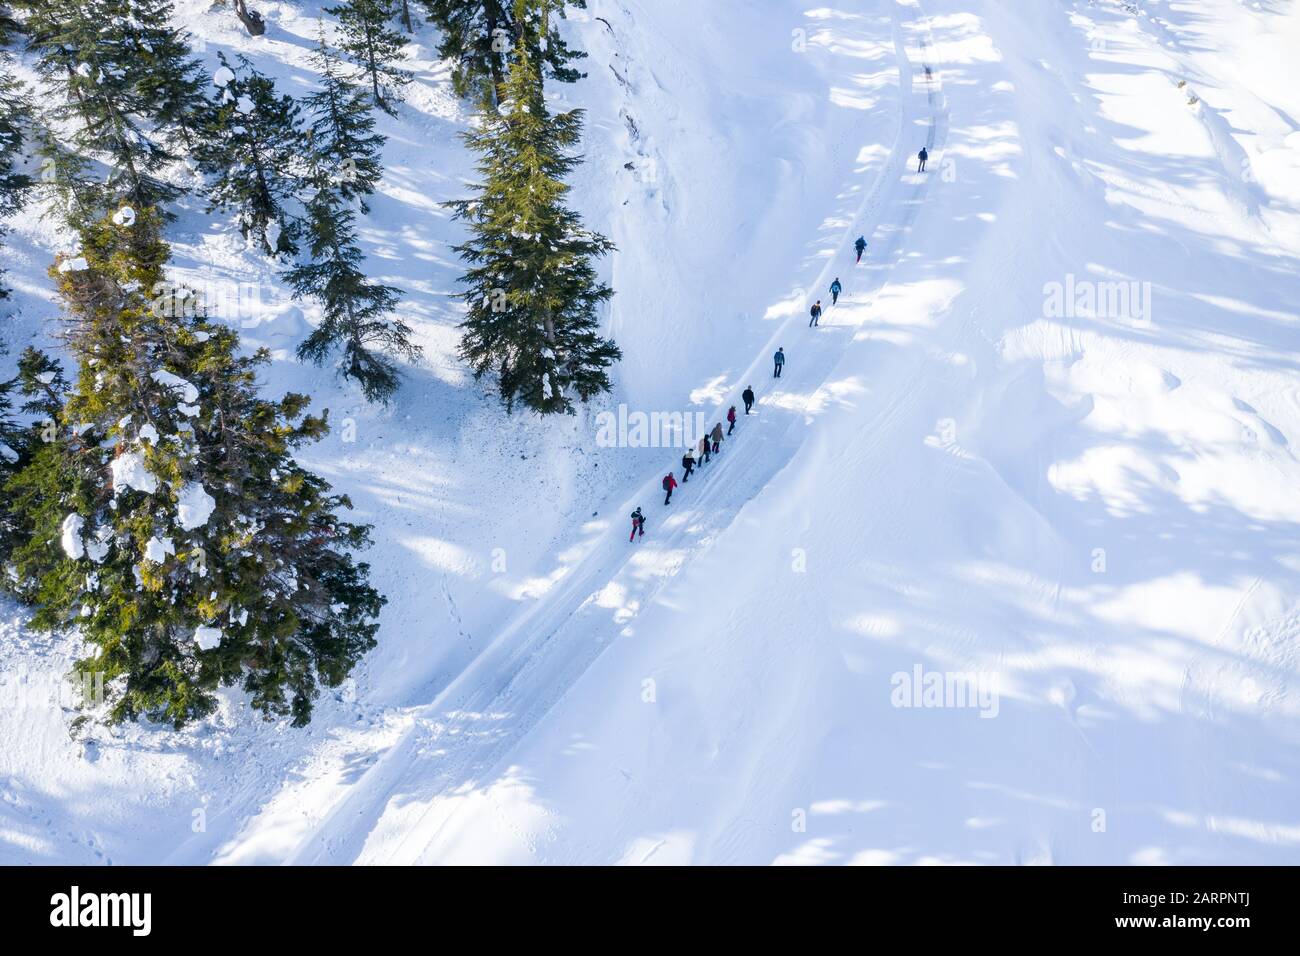 An aerial view s group of people trekking in the forest and mountains with covered snow Stock Photo